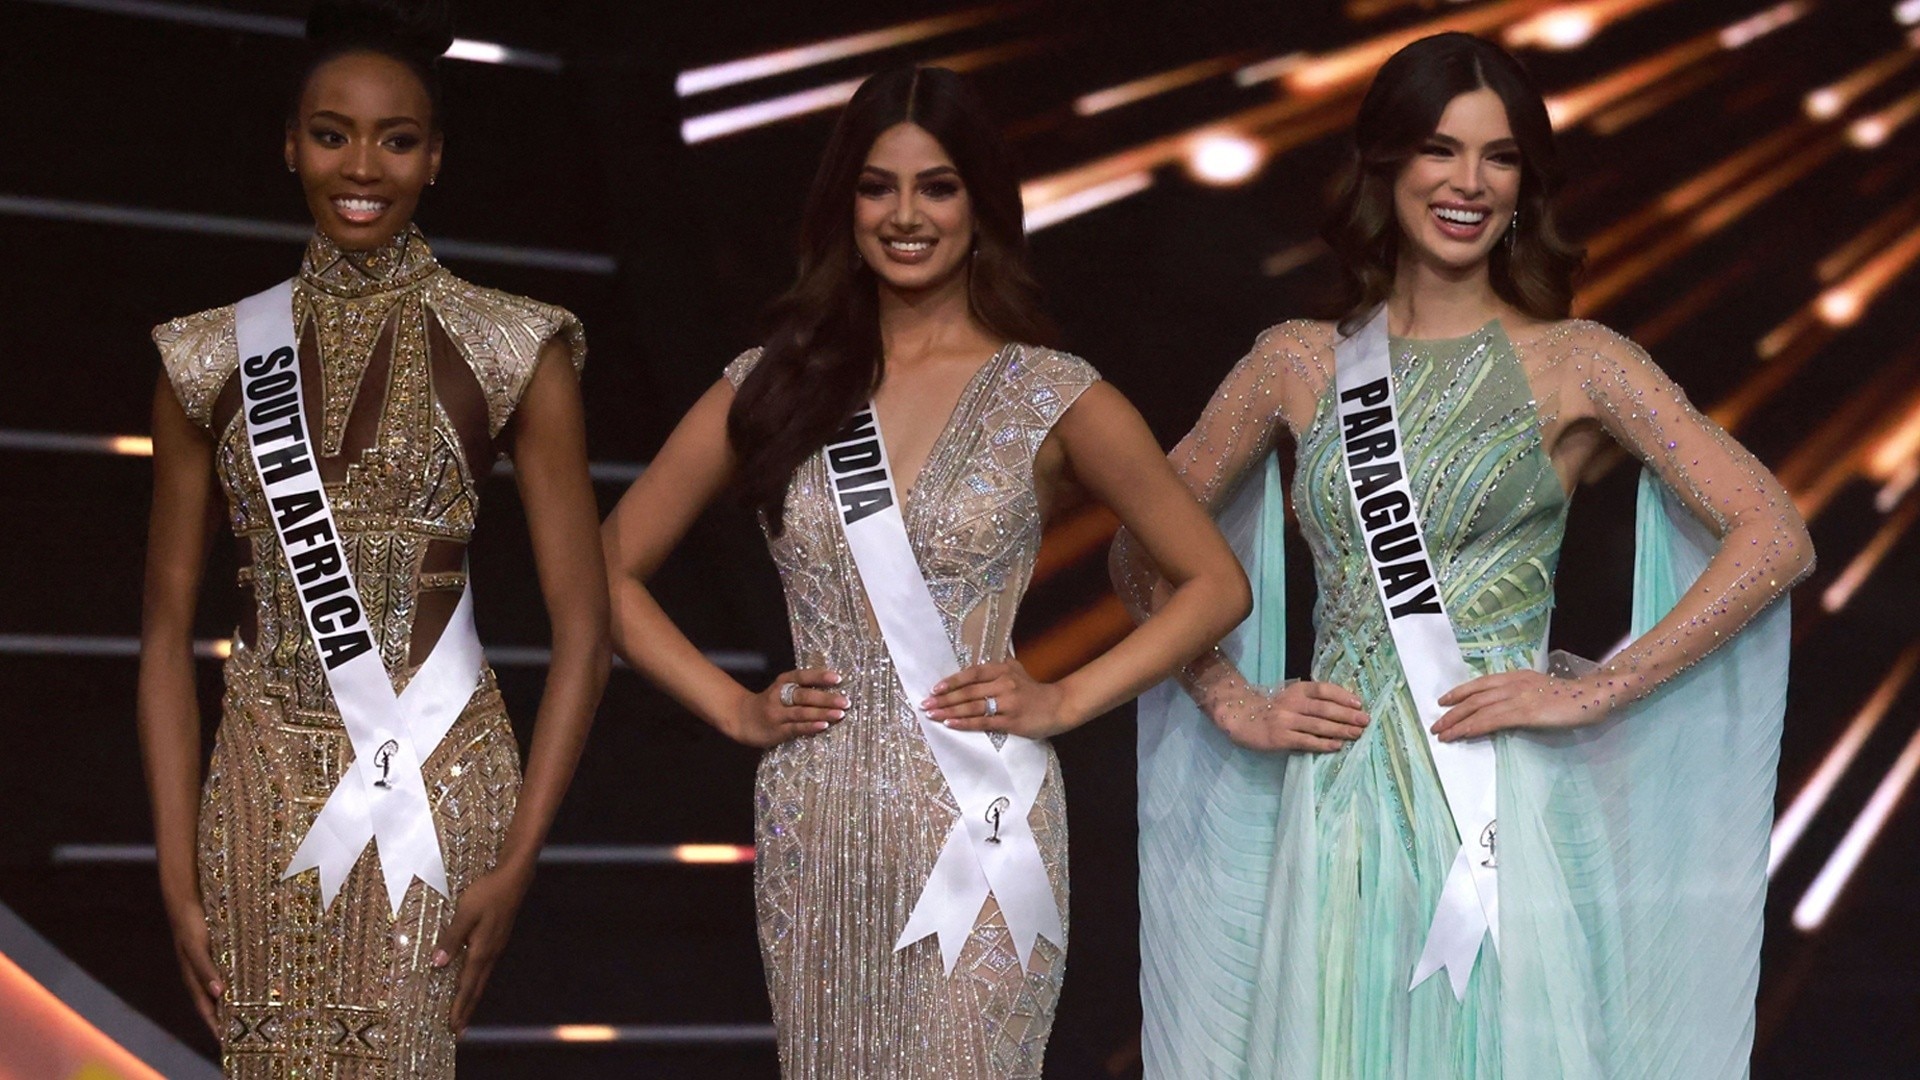 Watch Miss Universo Highlight Miss Universo Top 3 Miss Paraguay, Miss